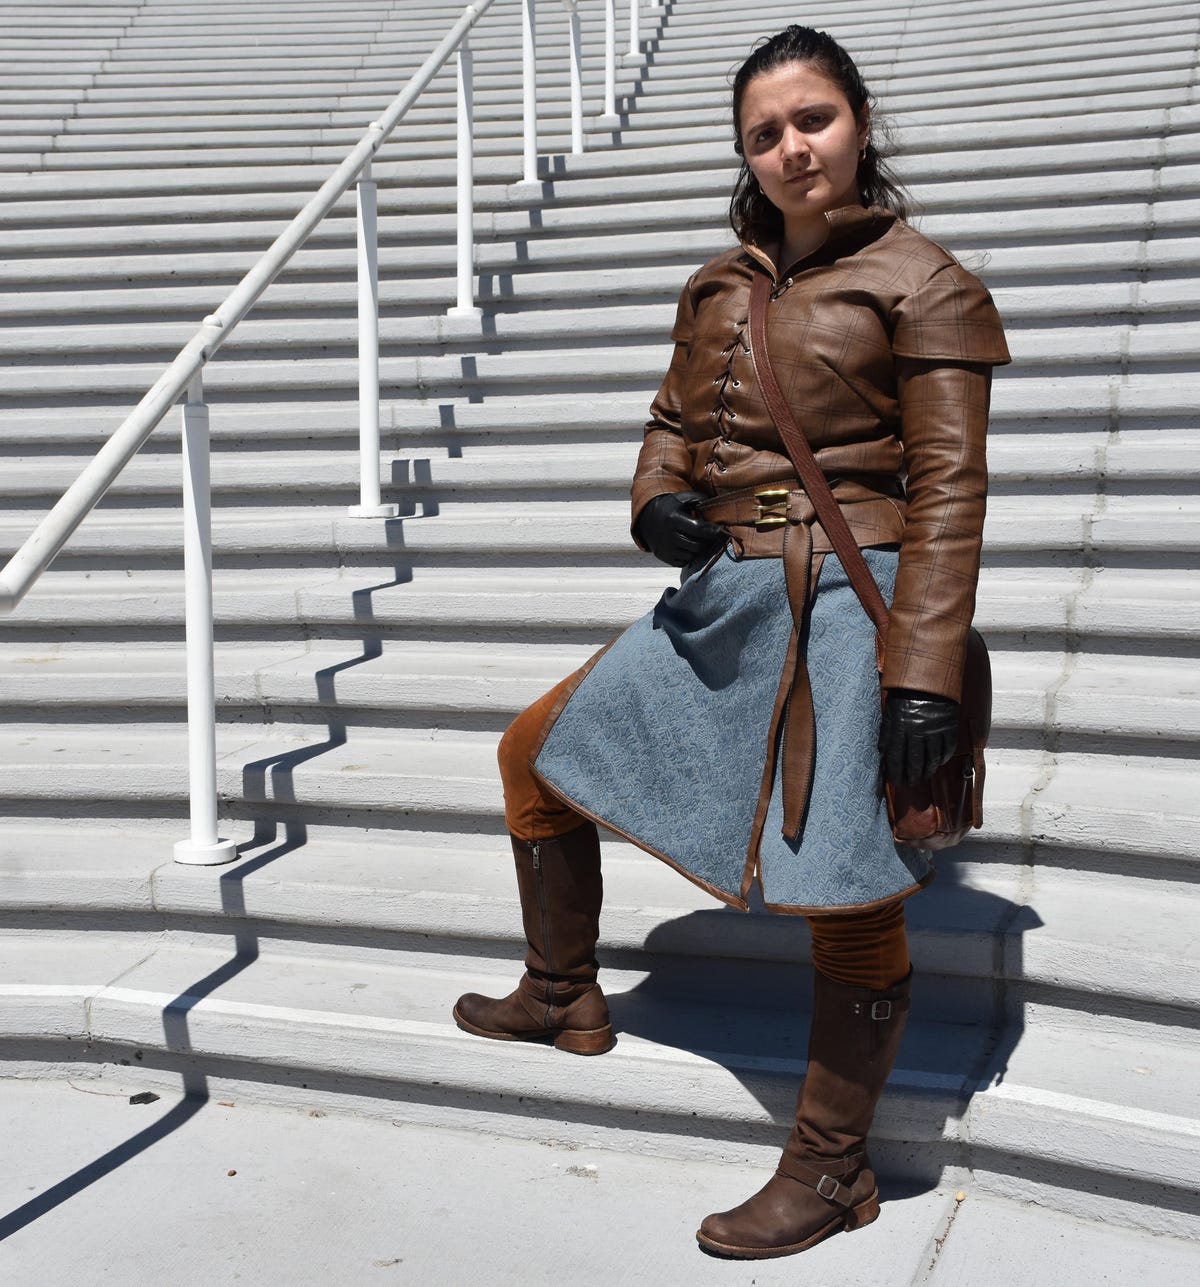 sdcc-2019-game-of-thrones-cosplay-4739